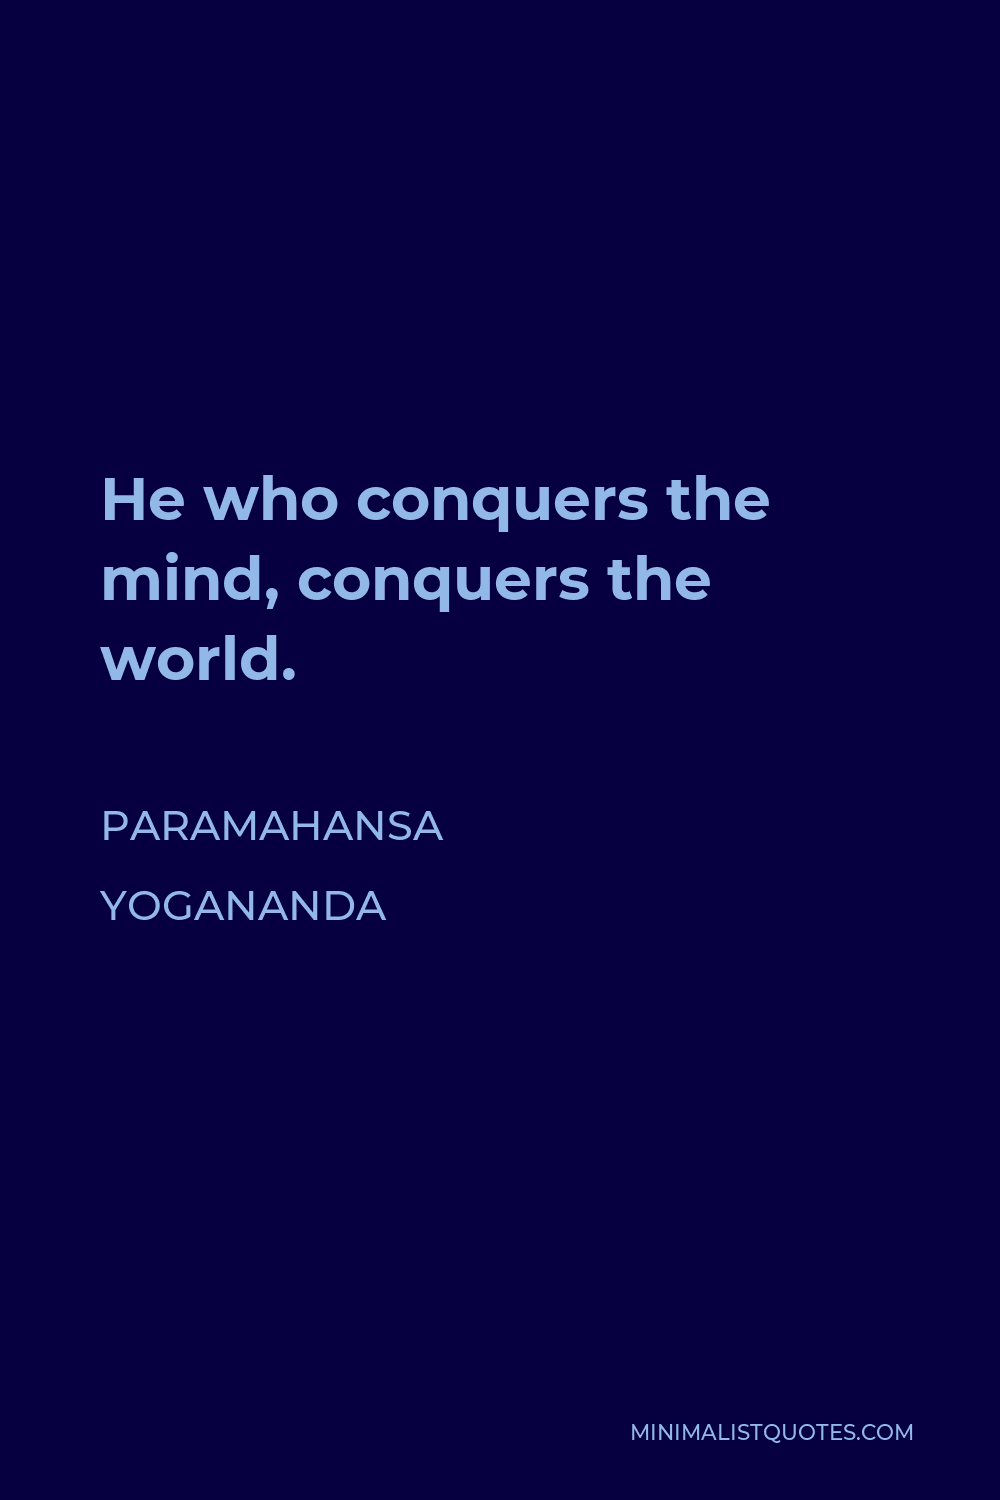 Paramahansa Yogananda Quote - He who conquers the mind, conquers the world.